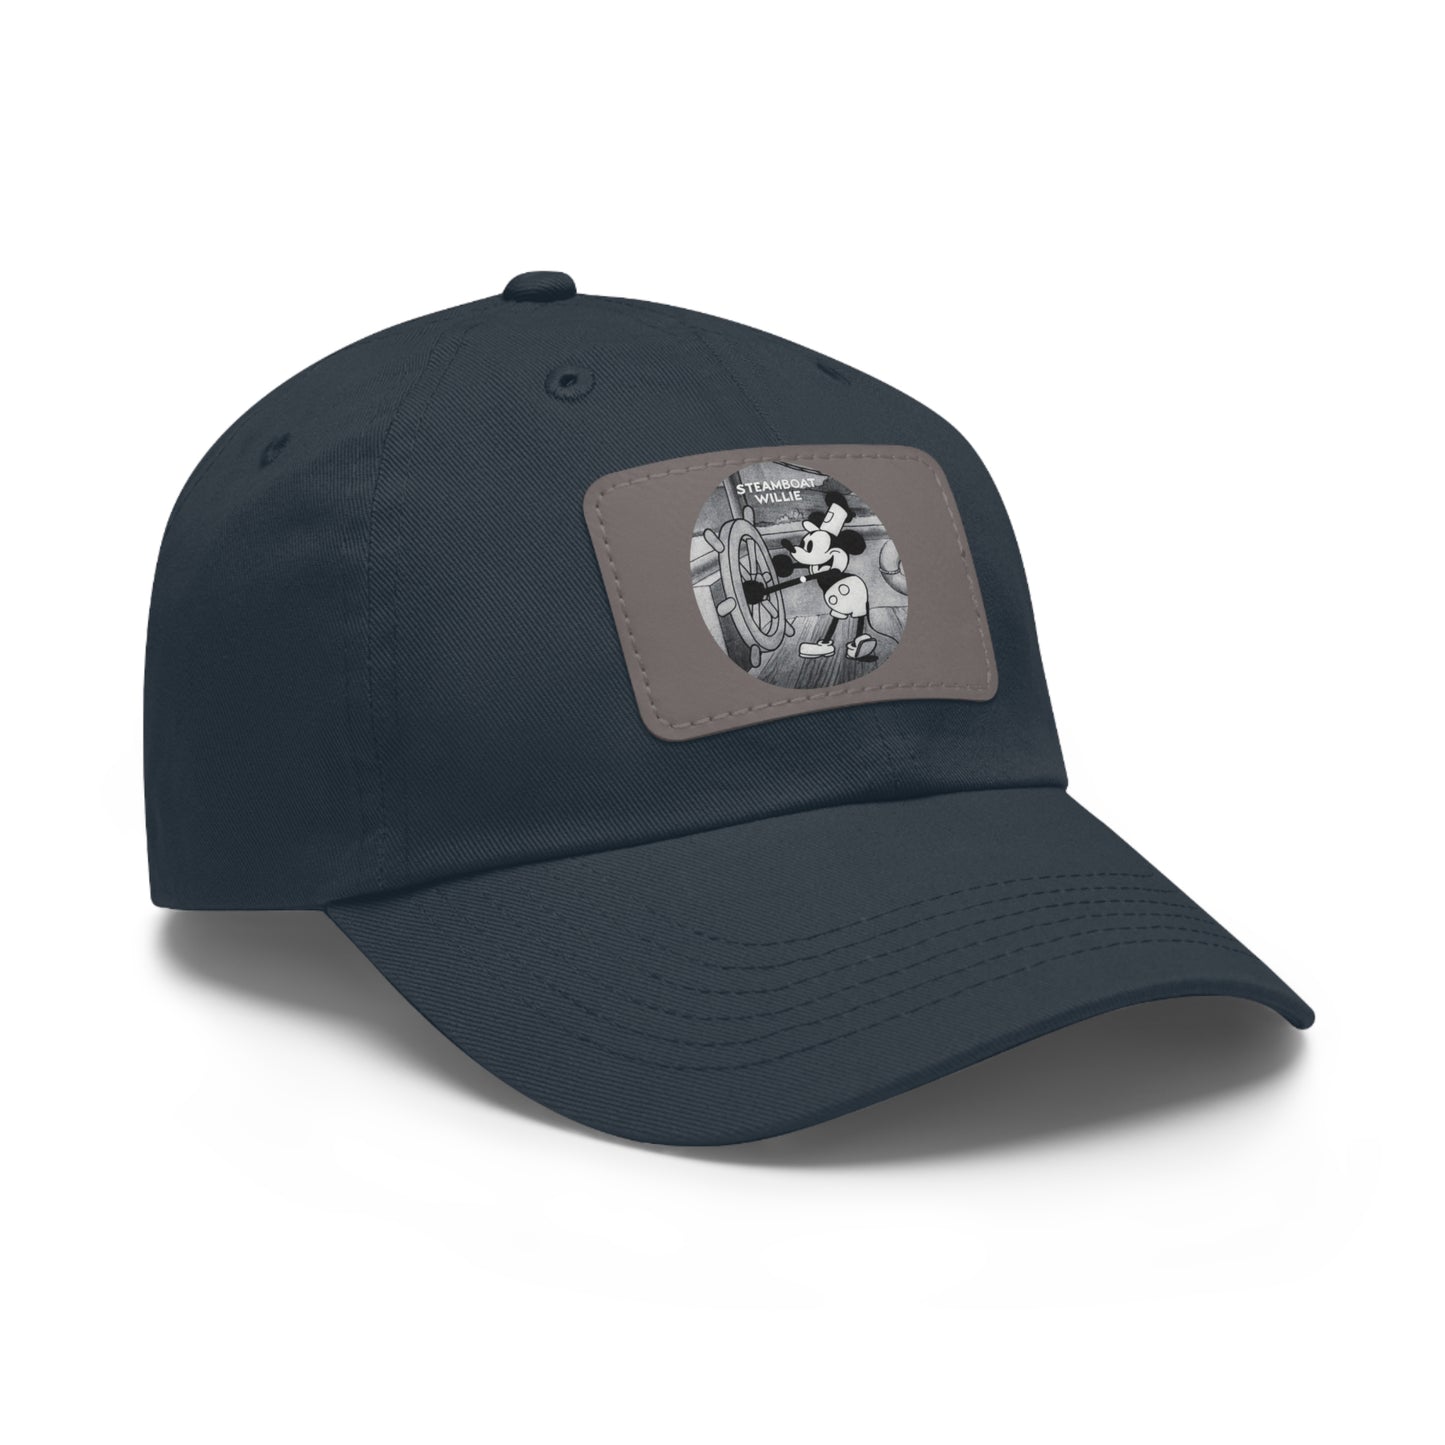 "Steamboat Willie" Hat with Leather Patch (Rectangle), Ballcap, Sewn-In Label, Buckle Closure